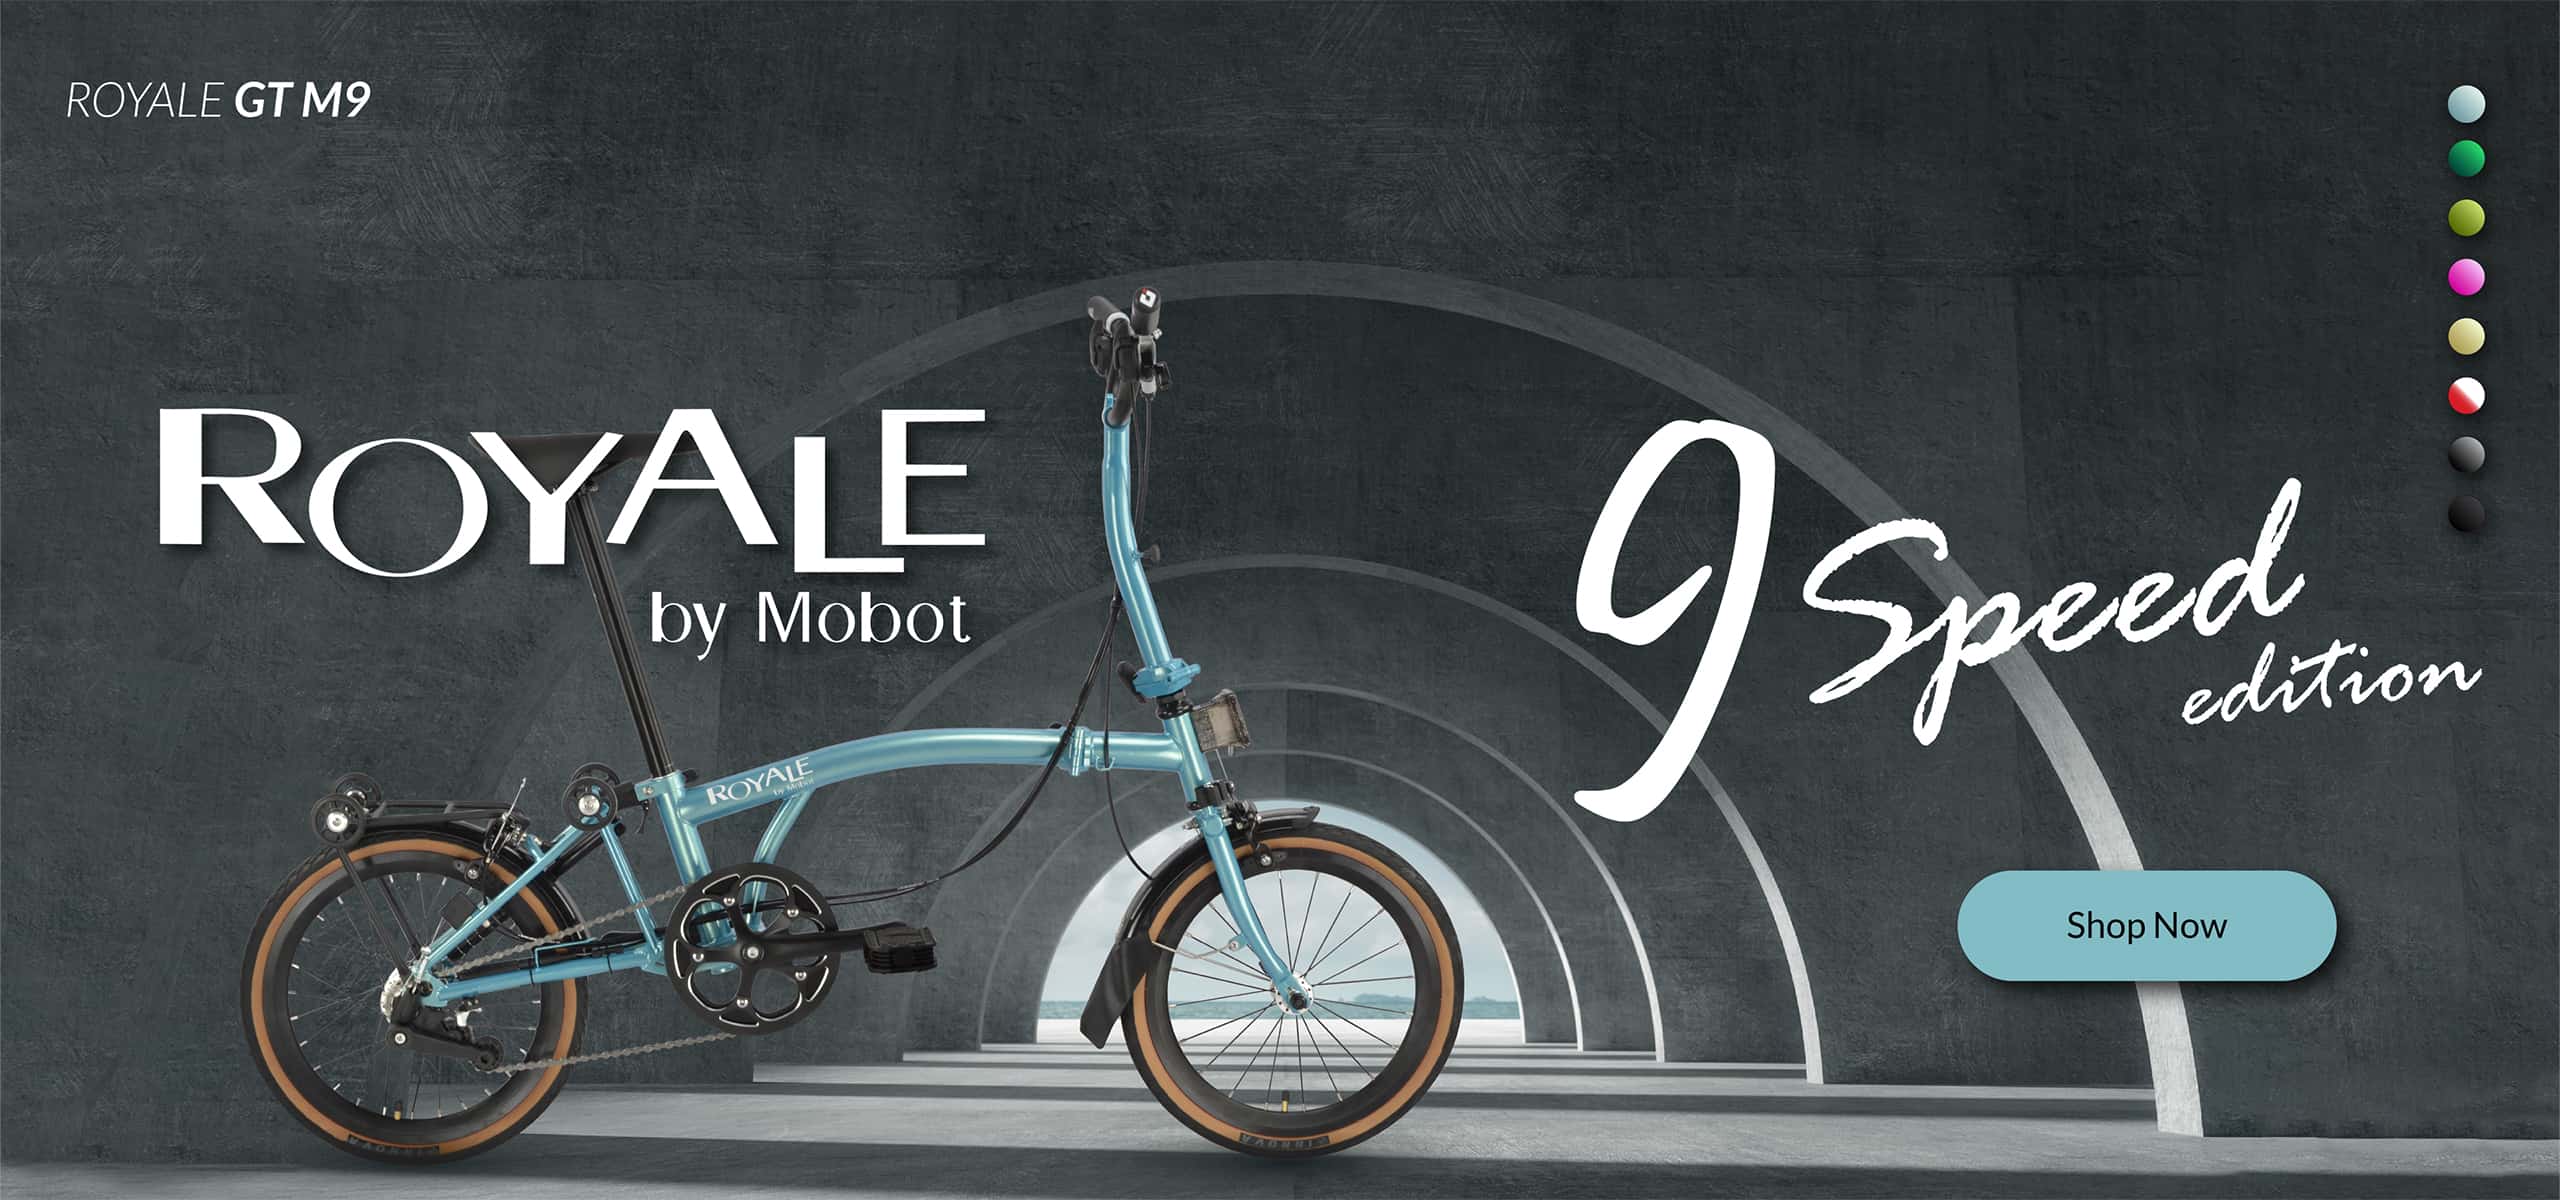 Front page banner MOBOT ROYALE GT 9 Speed foldable bicycle 2560x1200 V2 - Home